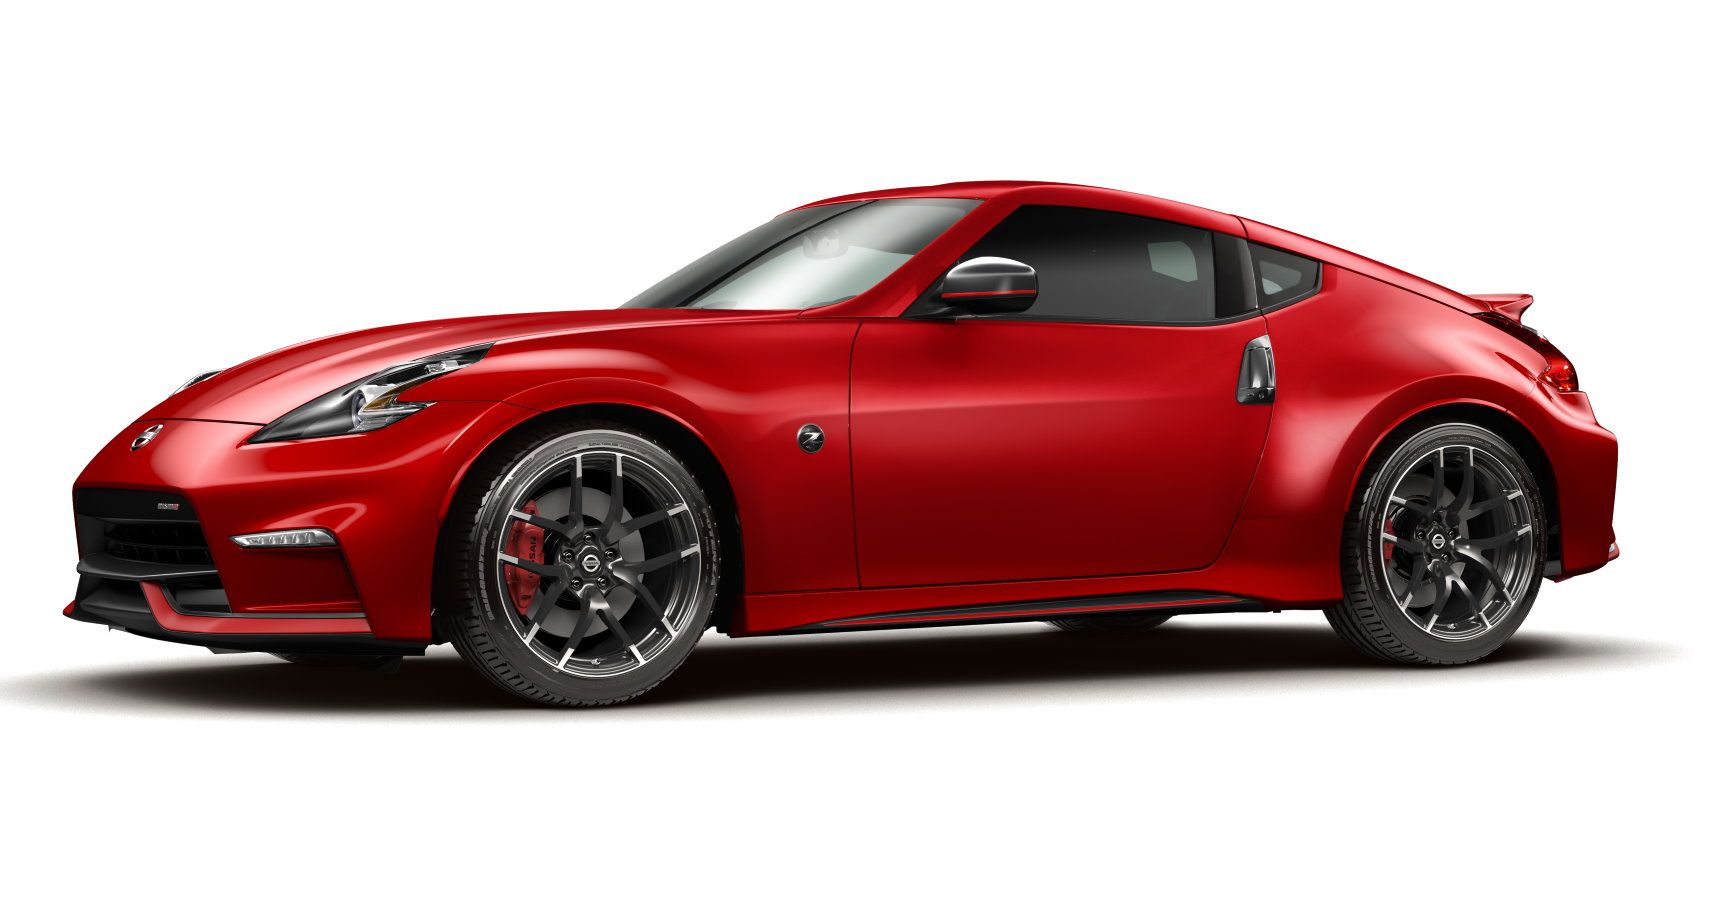 For 2018, the 370Z NISMO continues its role as the ultimate Z??. The changes for the 2018 model year are performance related. Dunlop SP Sport MAXX GT600 high-performance tires, which adopt the same tread pattern as the GT-R, replace the previous Bridgestone Potenza S001 tires. Also, driving response is further enhanced with the addition of a new EXEDY?? high-performance clutch.